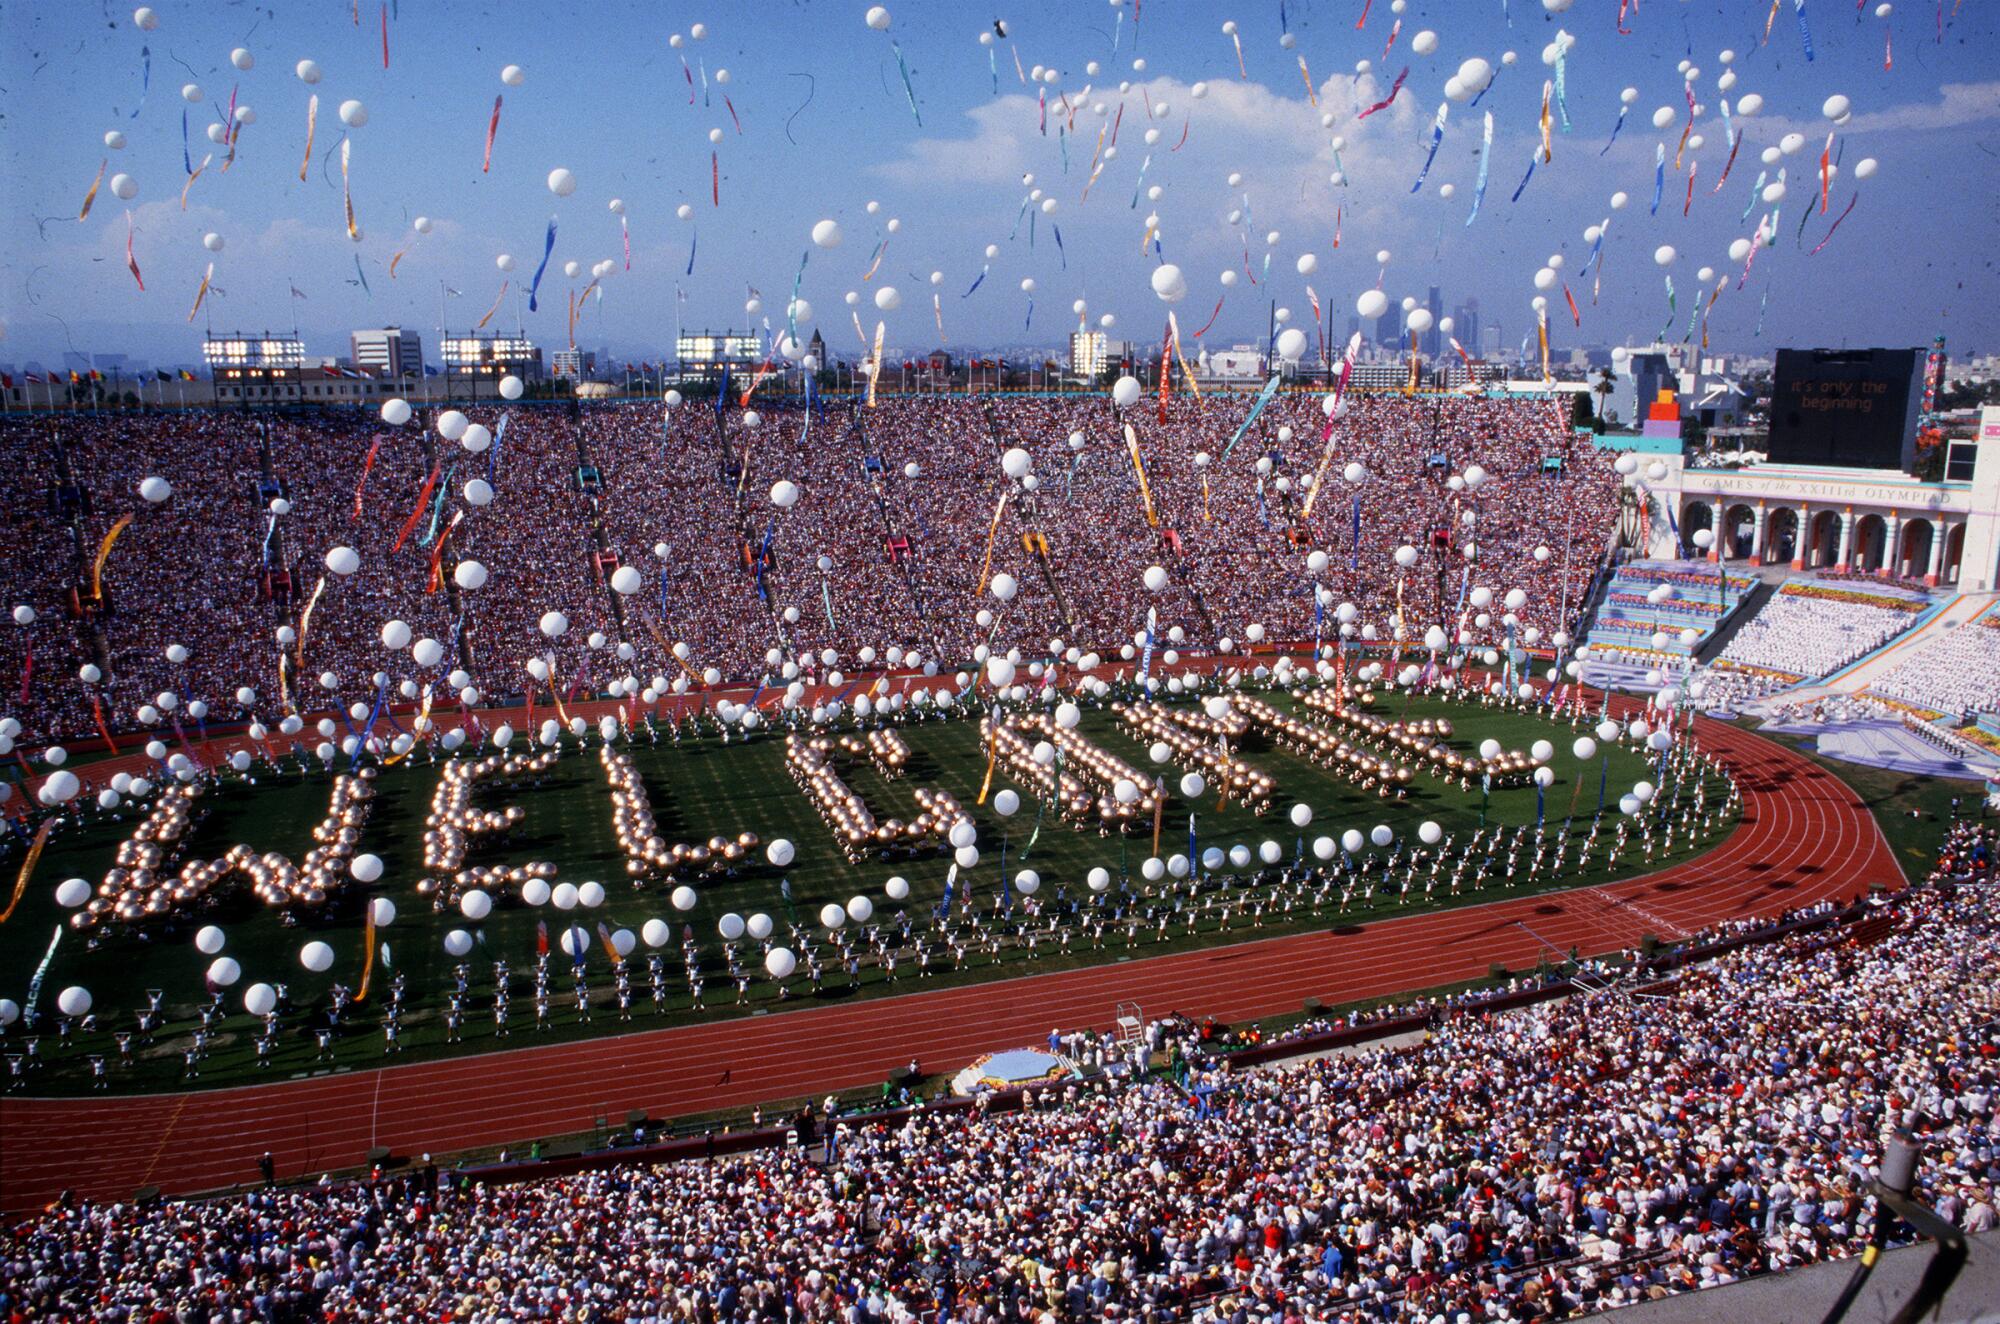 Scene at the Coliseum in Los Angeles during opening ceremonies of the 1984 Olympic Games.